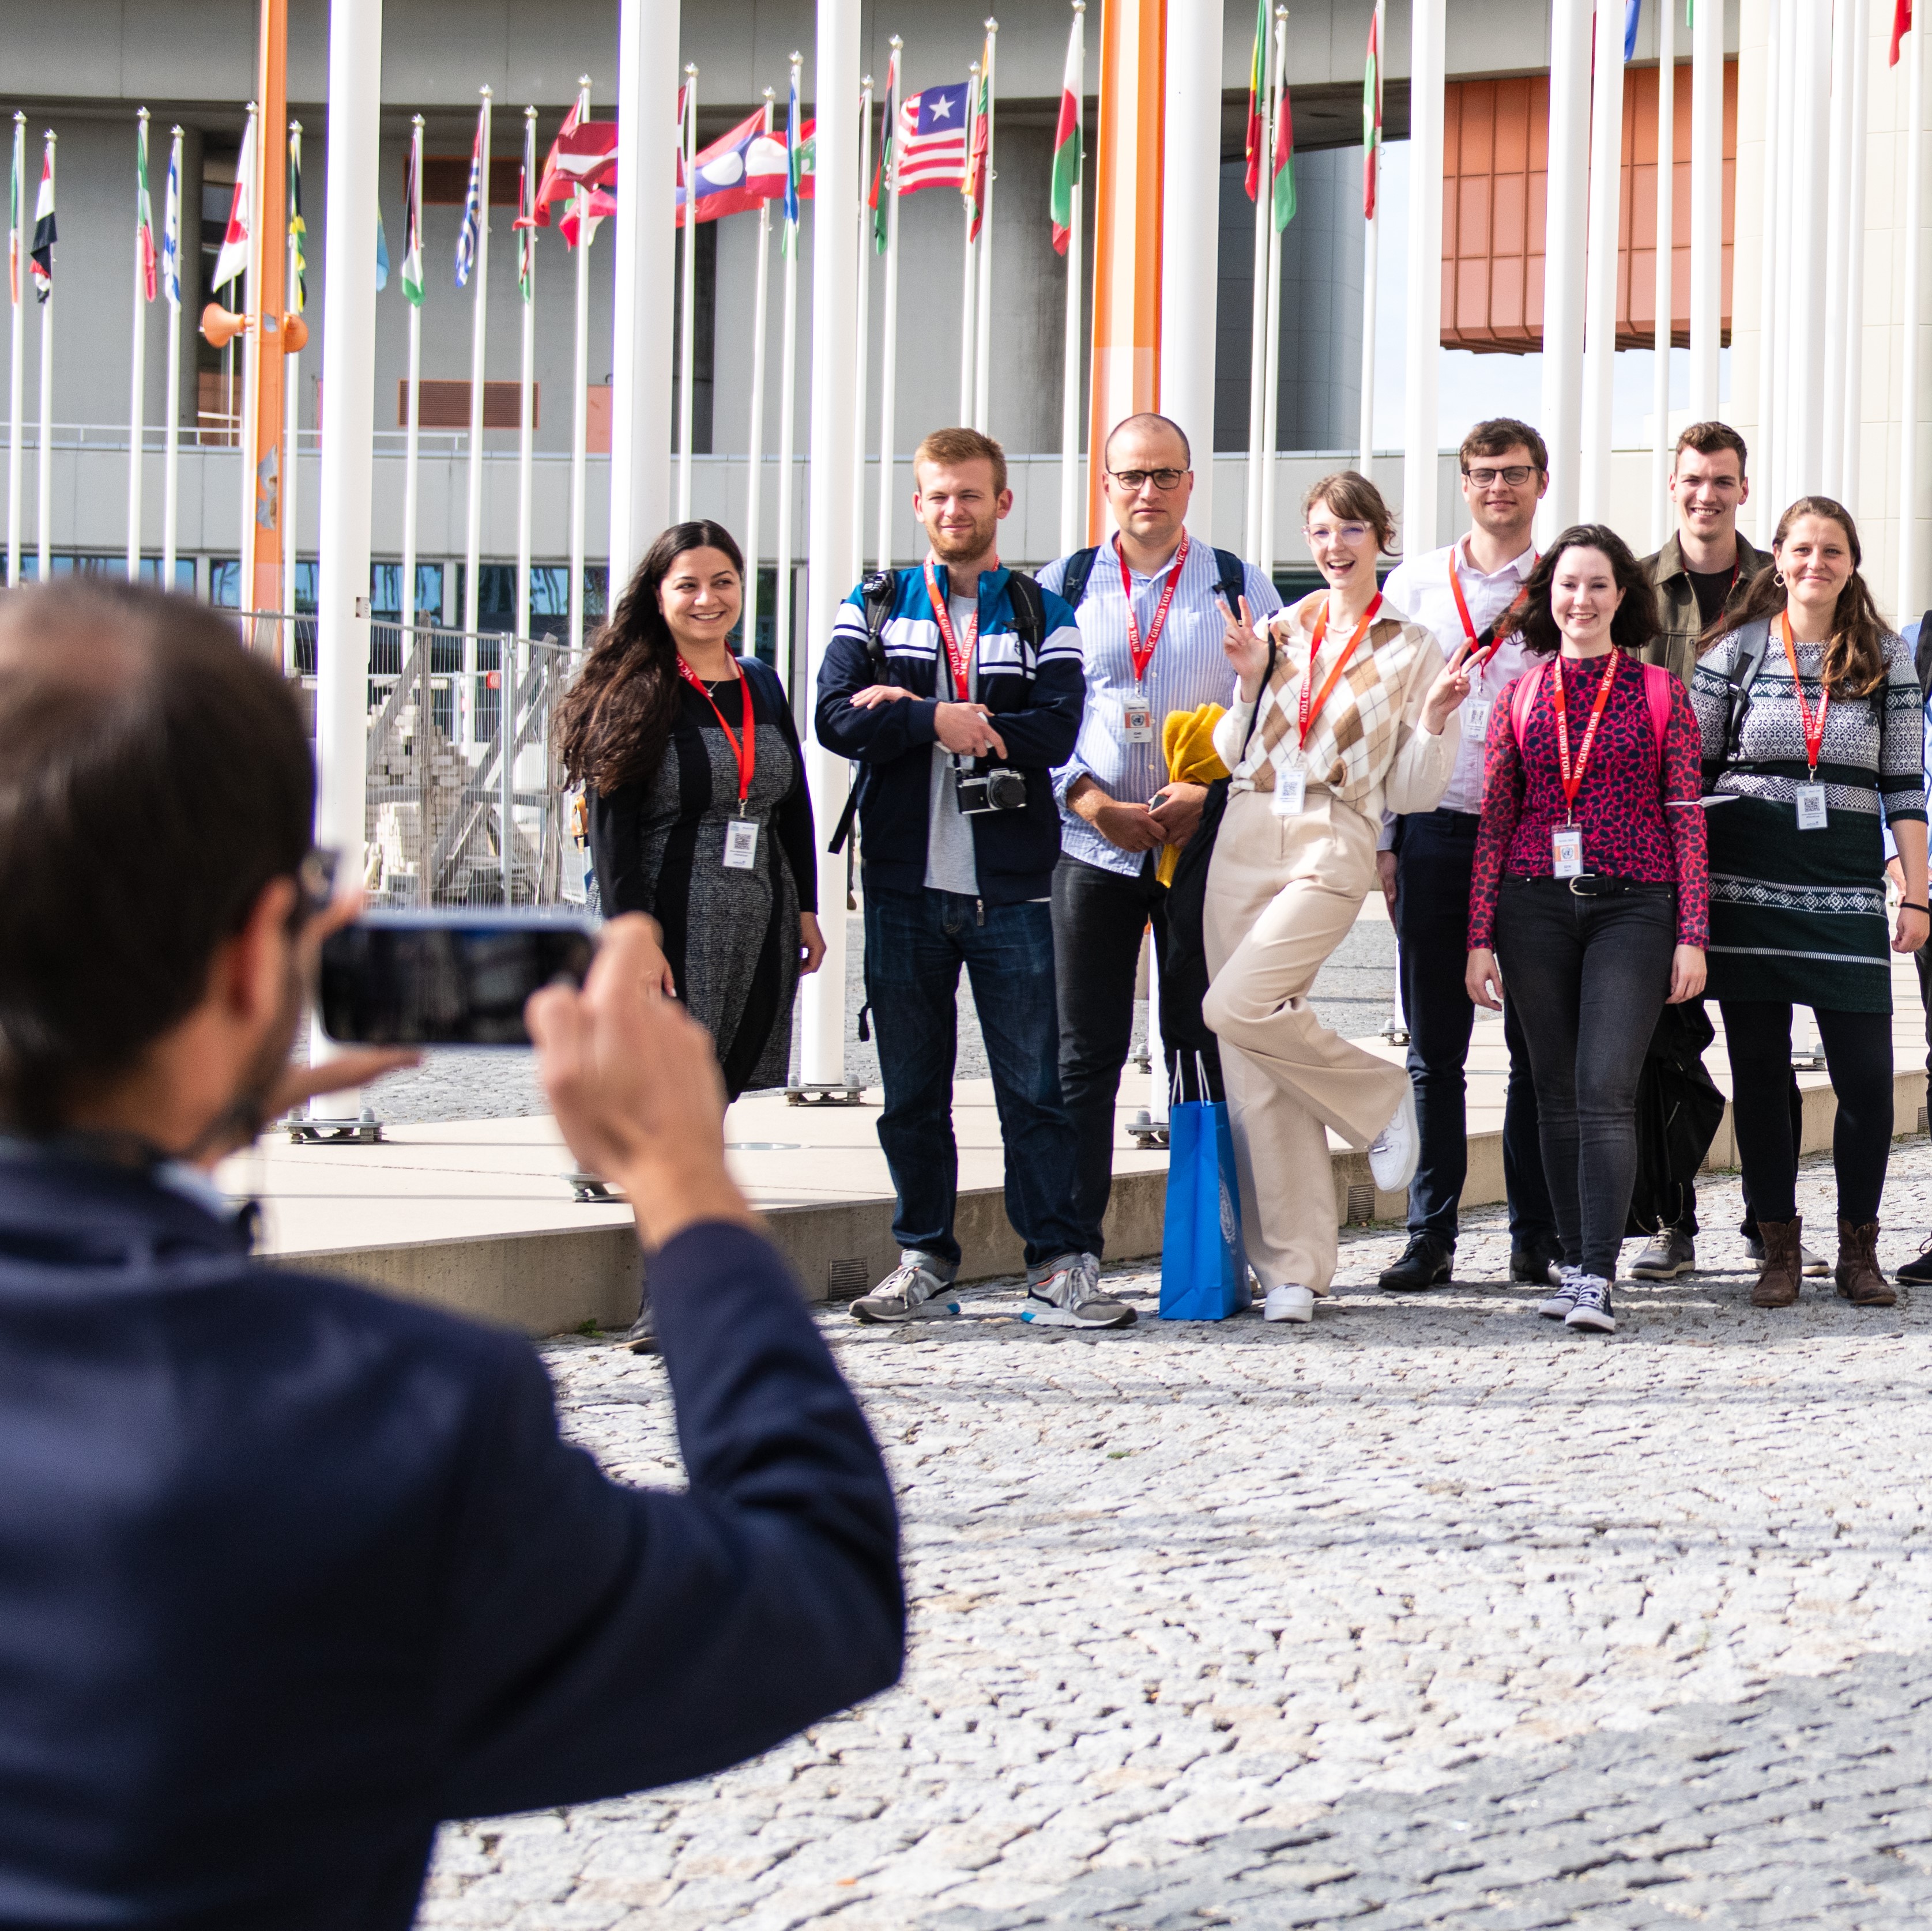 Visitors posing for a group photo inside the UN in Vienna